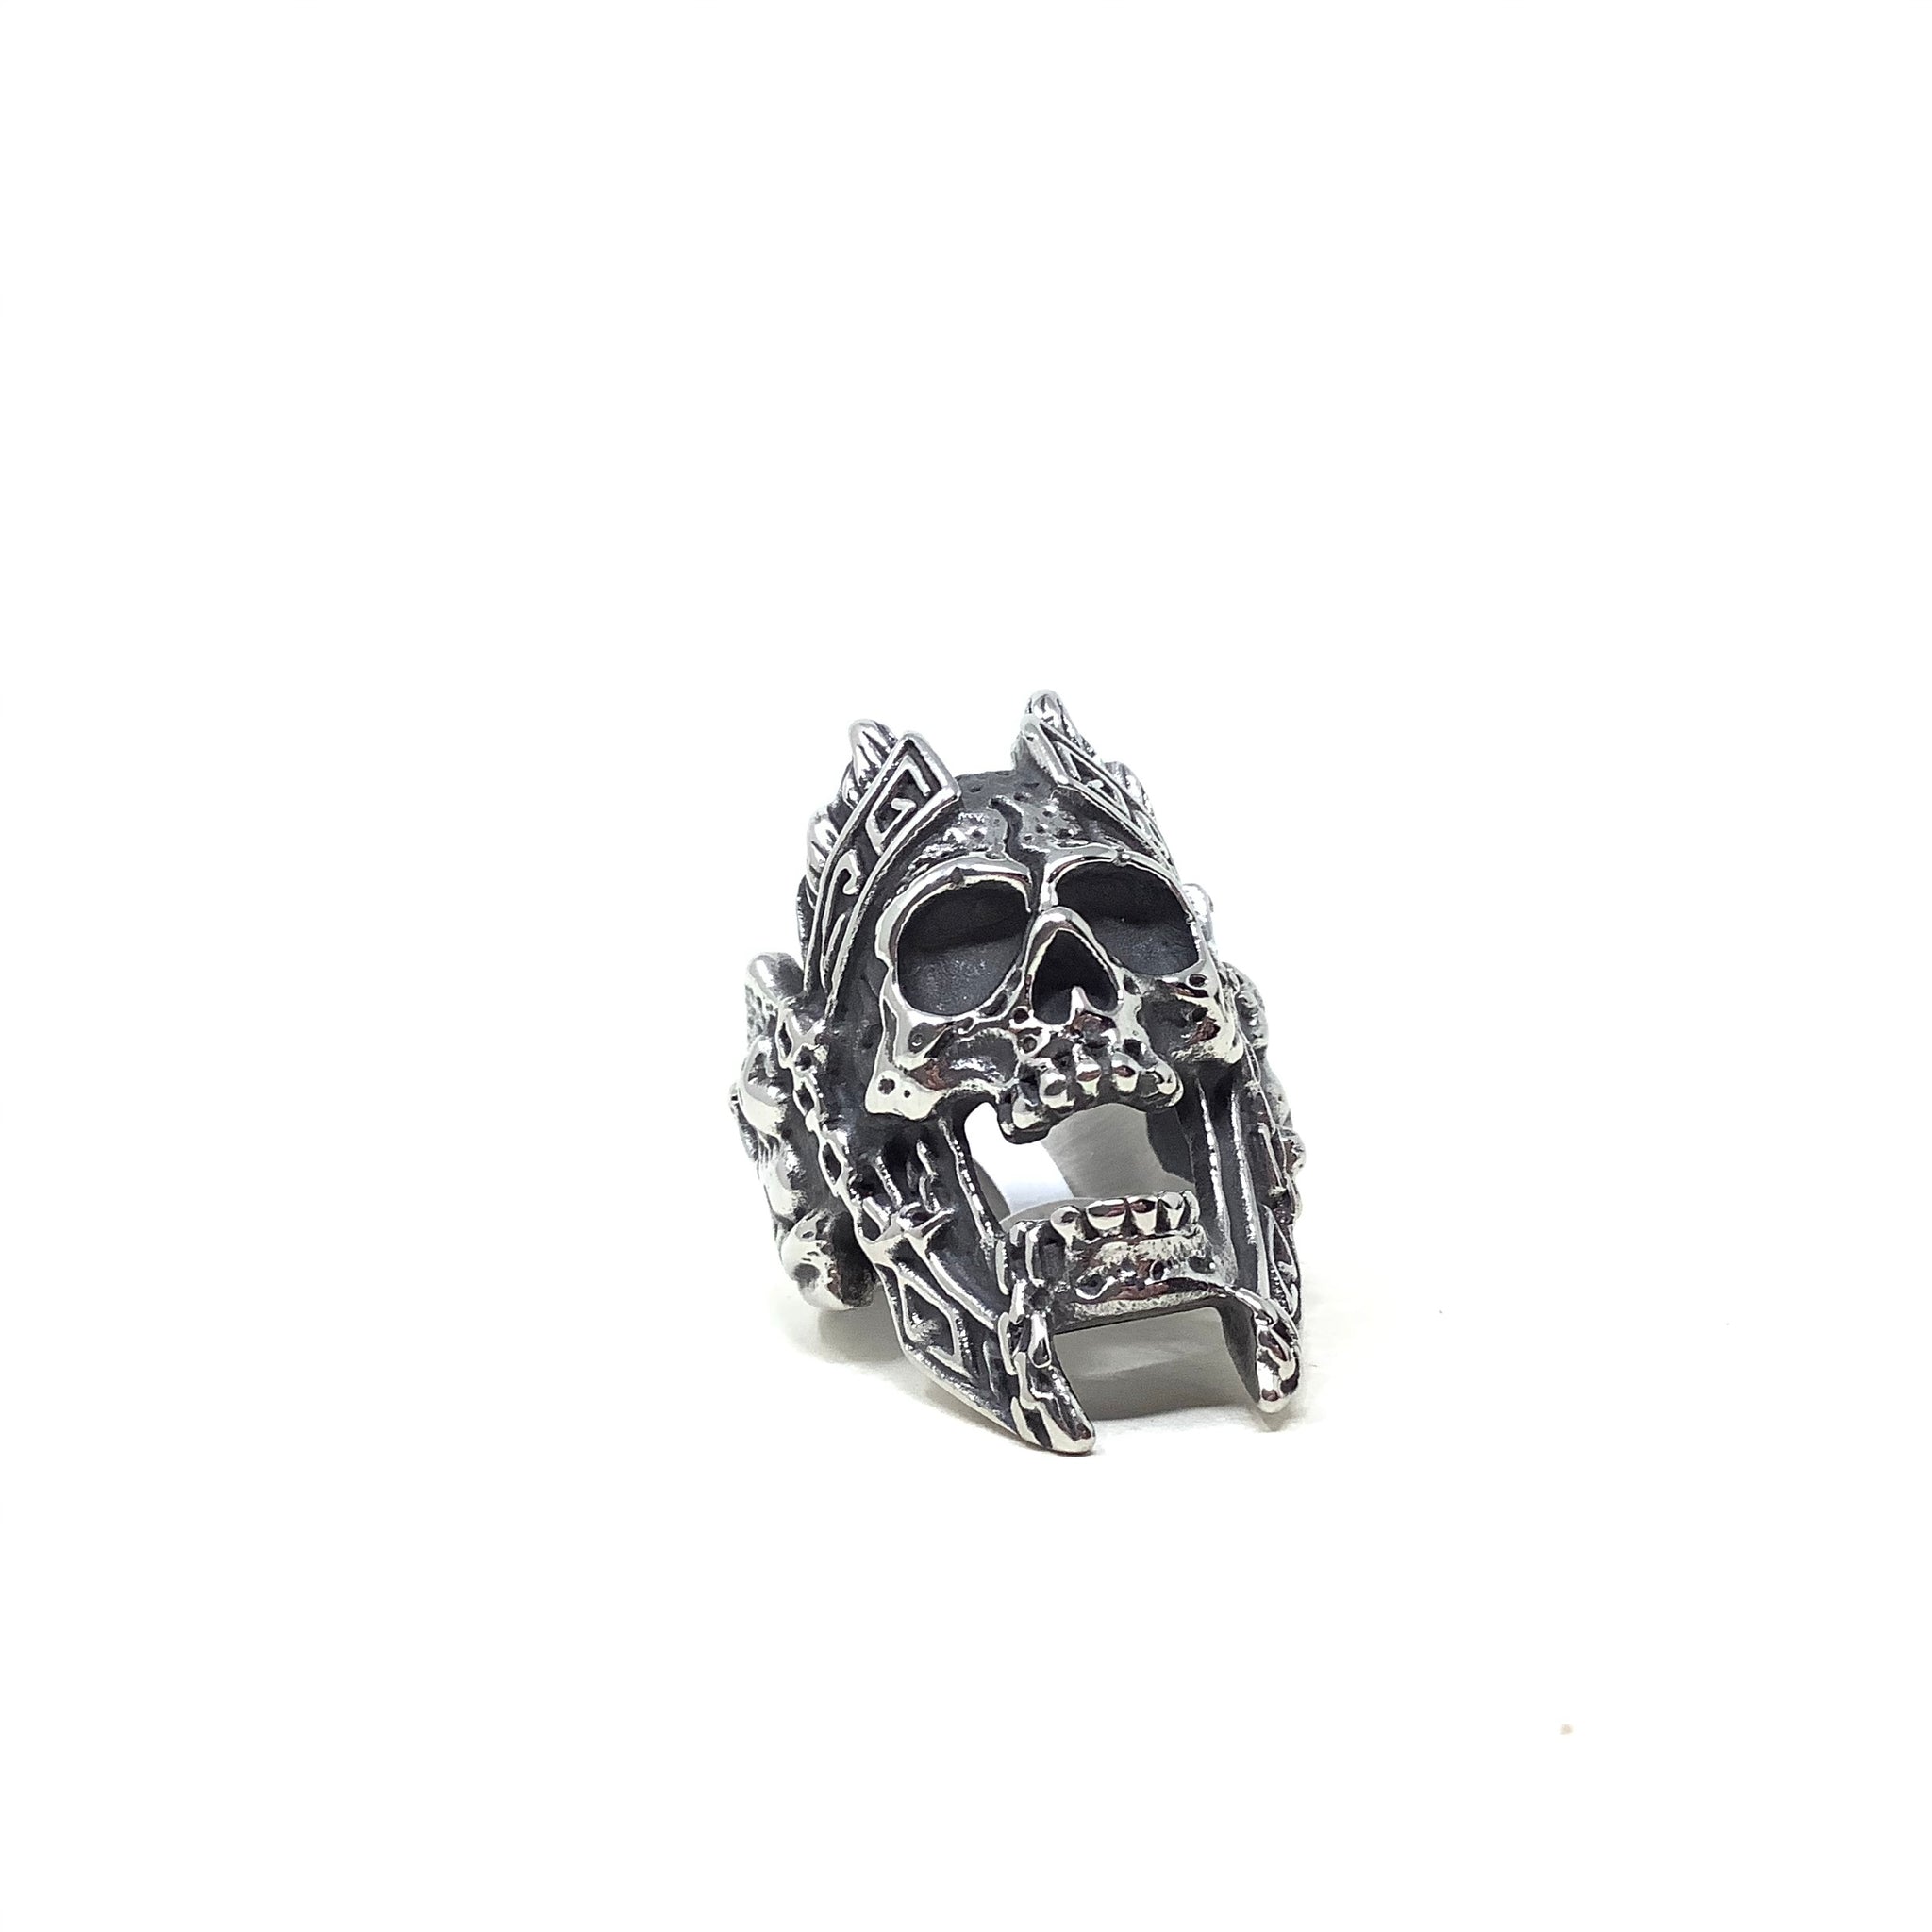 Size 13 Steel Dungeon Dice Ring